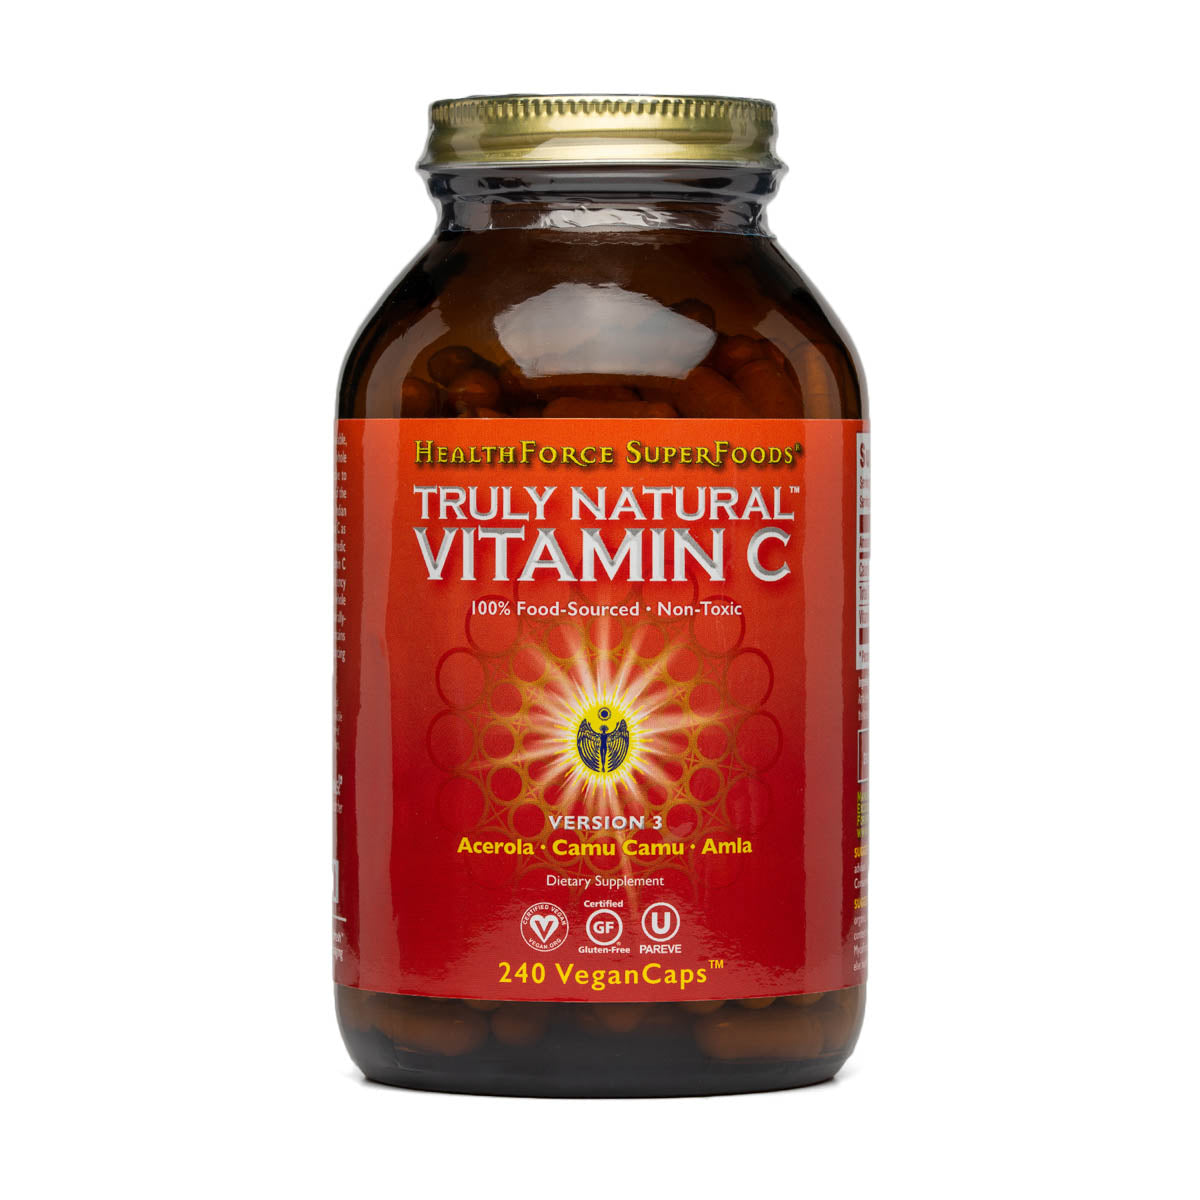 Vitamin C Capsules | Health Force | Raw Living UK | Supplements | HealthForce Truly Natural Vitamin C (240 Caps/180g) provides natural, highly bioavailable Vitamin C, using Camu Camu Berry, Amla berry &amp; Acerola Cherry.